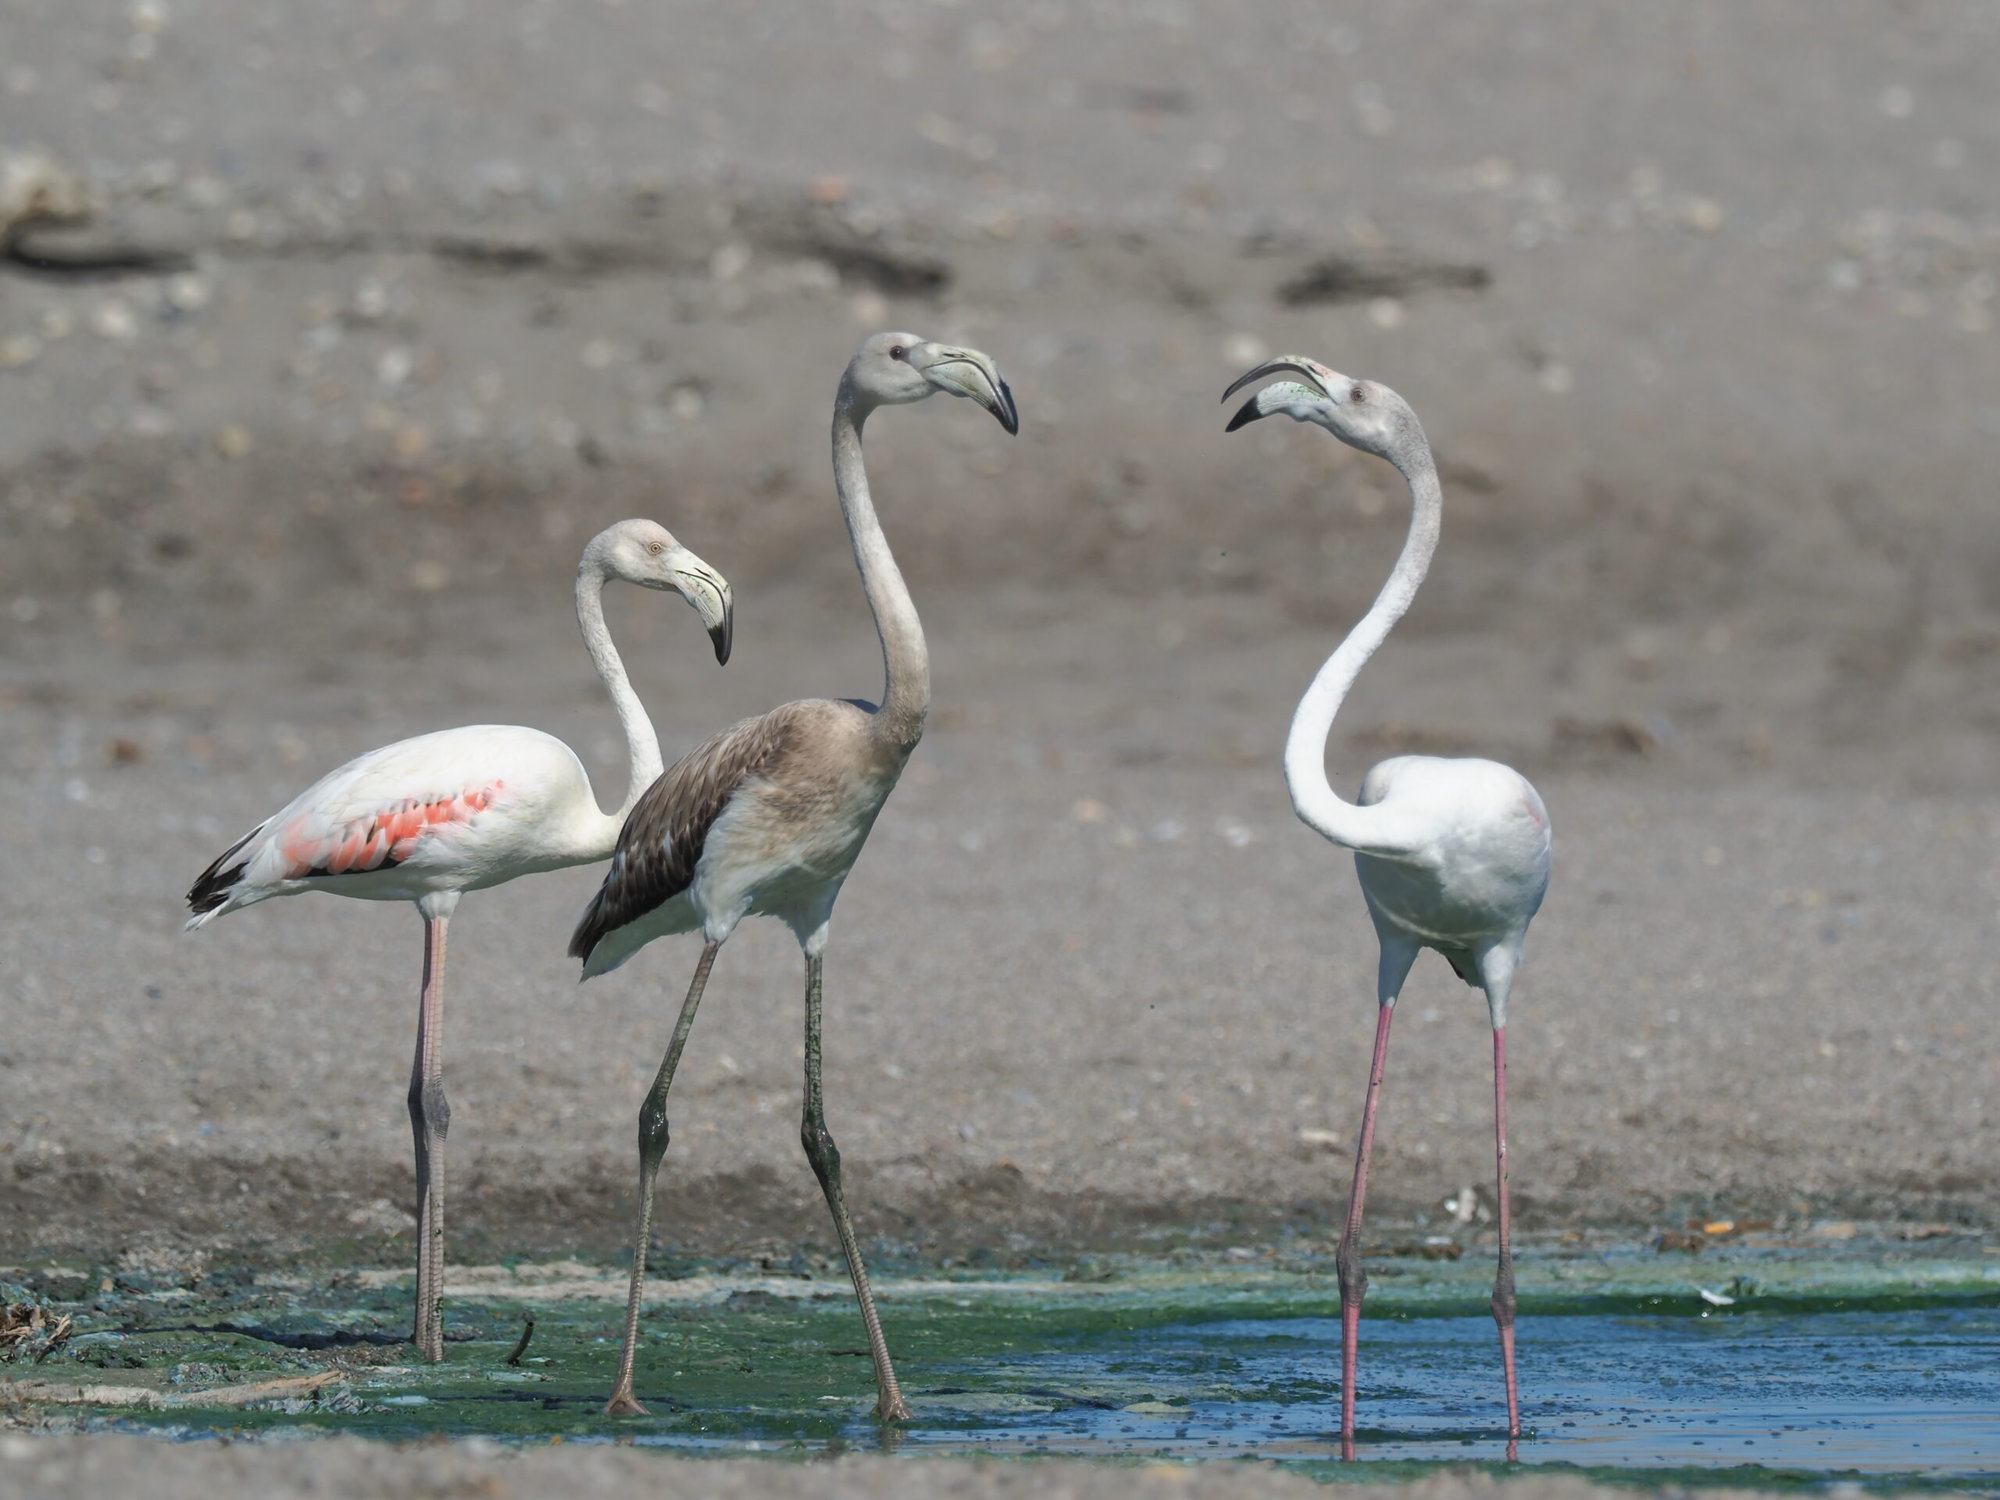 Does Hotter Climate Imply Longer Legs For Birds?